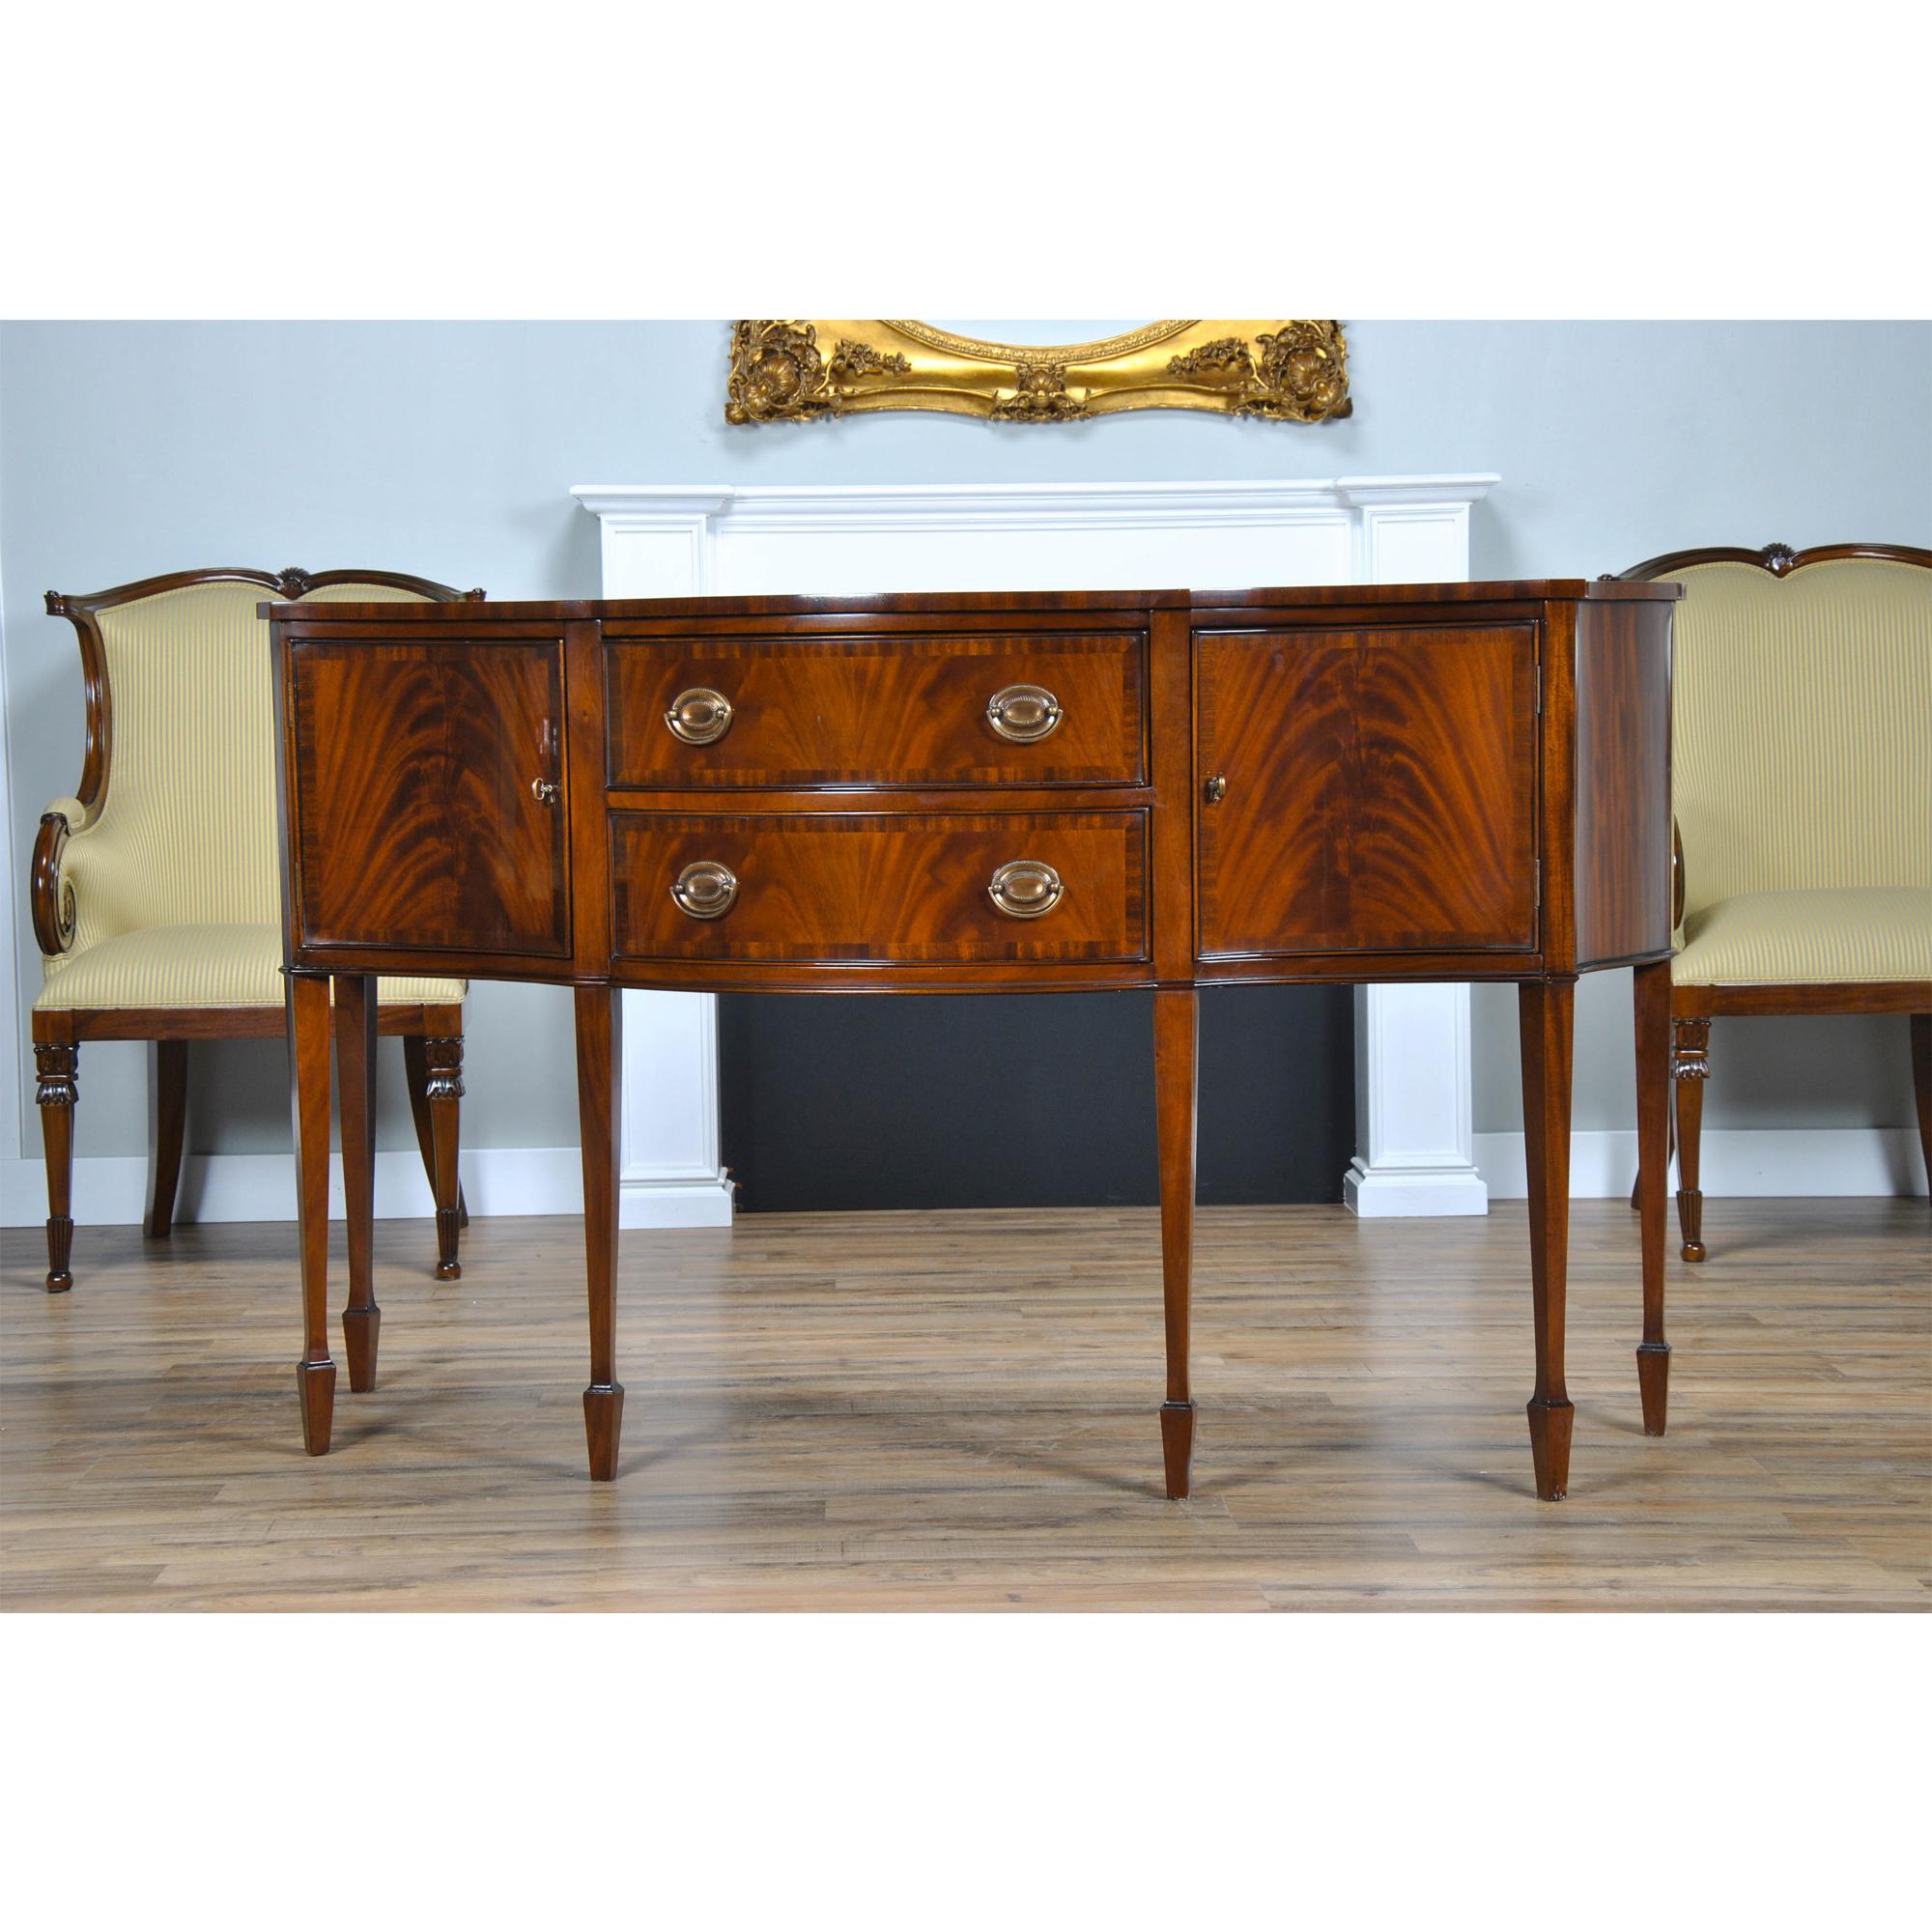 The Mahogany Banded Sideboard or buffet is subtle and understated in appearance. The banding across the top of this item and the banding around the outside of the drawer and door fronts of this piece offer a subtle contrast to the fine quality